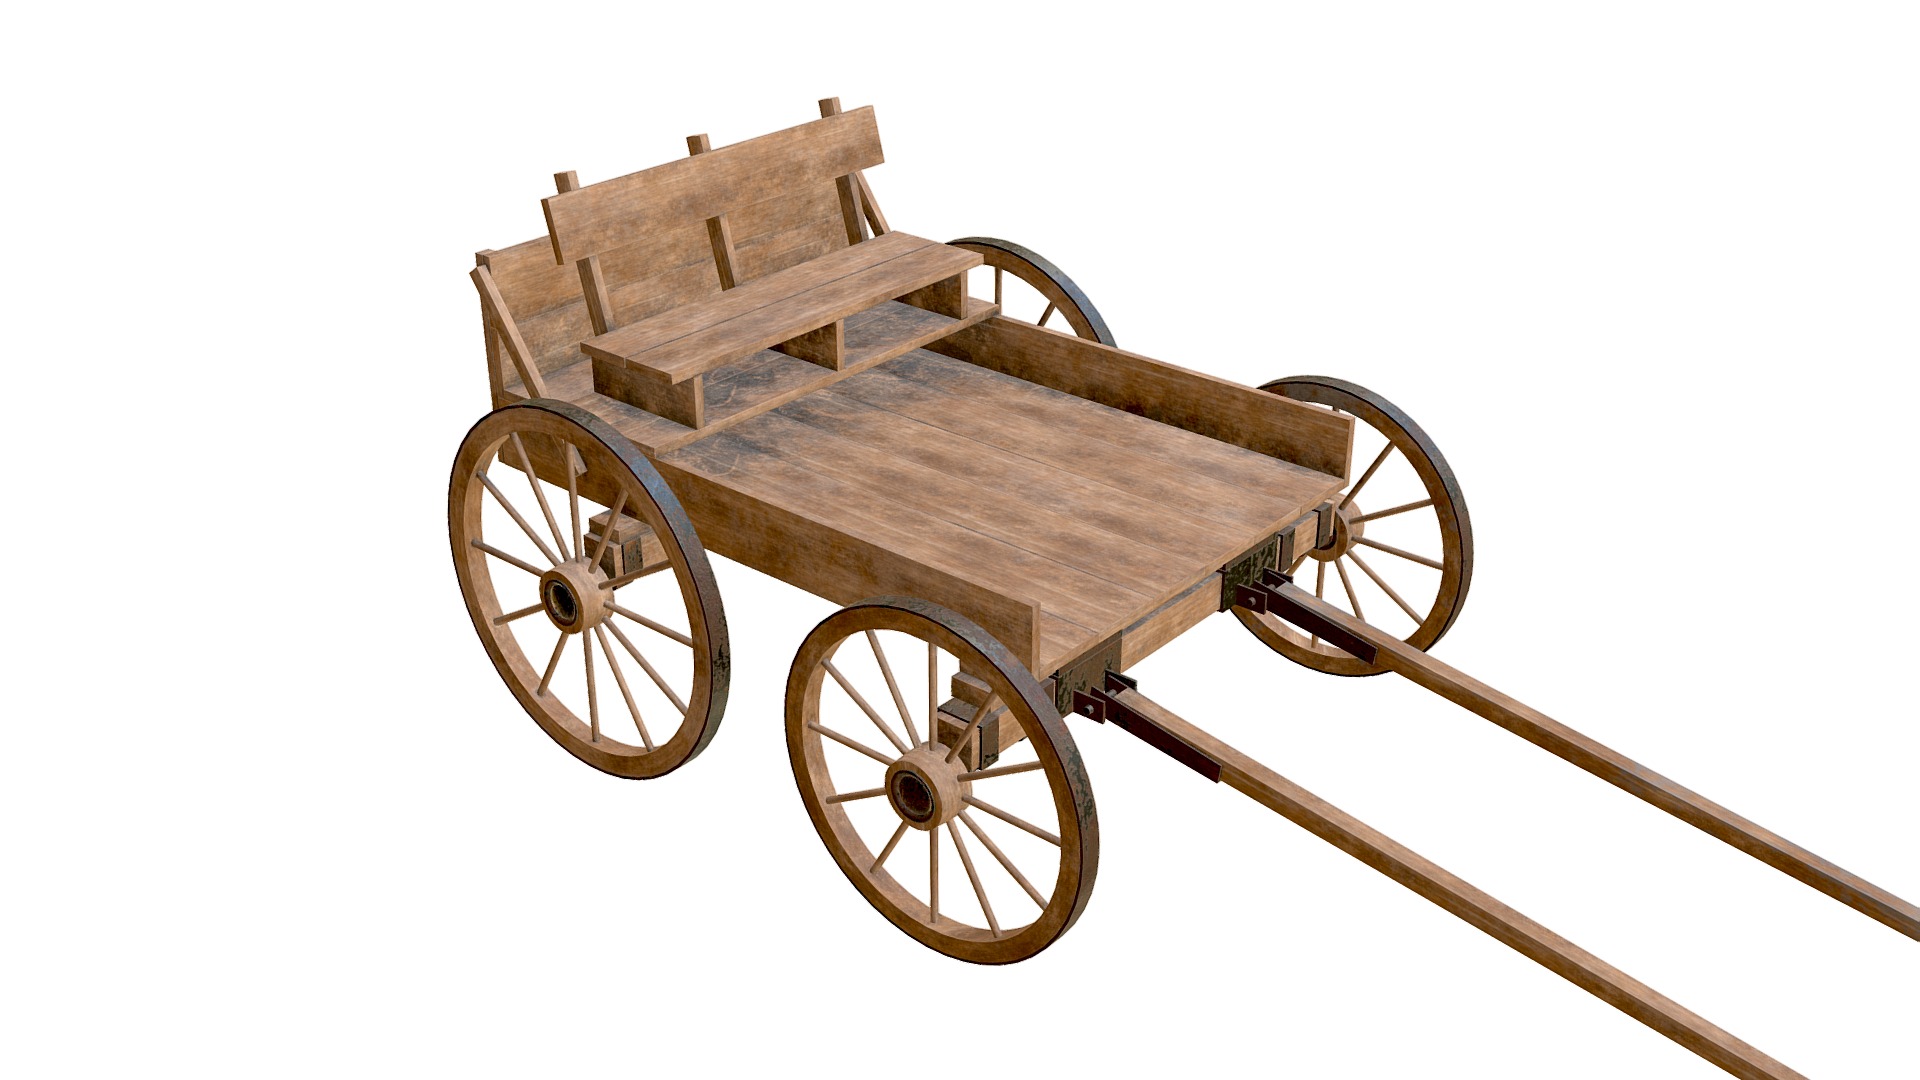 3D model Wooden cart with bench - This is a 3D model of the Wooden cart with bench. The 3D model is about a wooden cart with wheels.